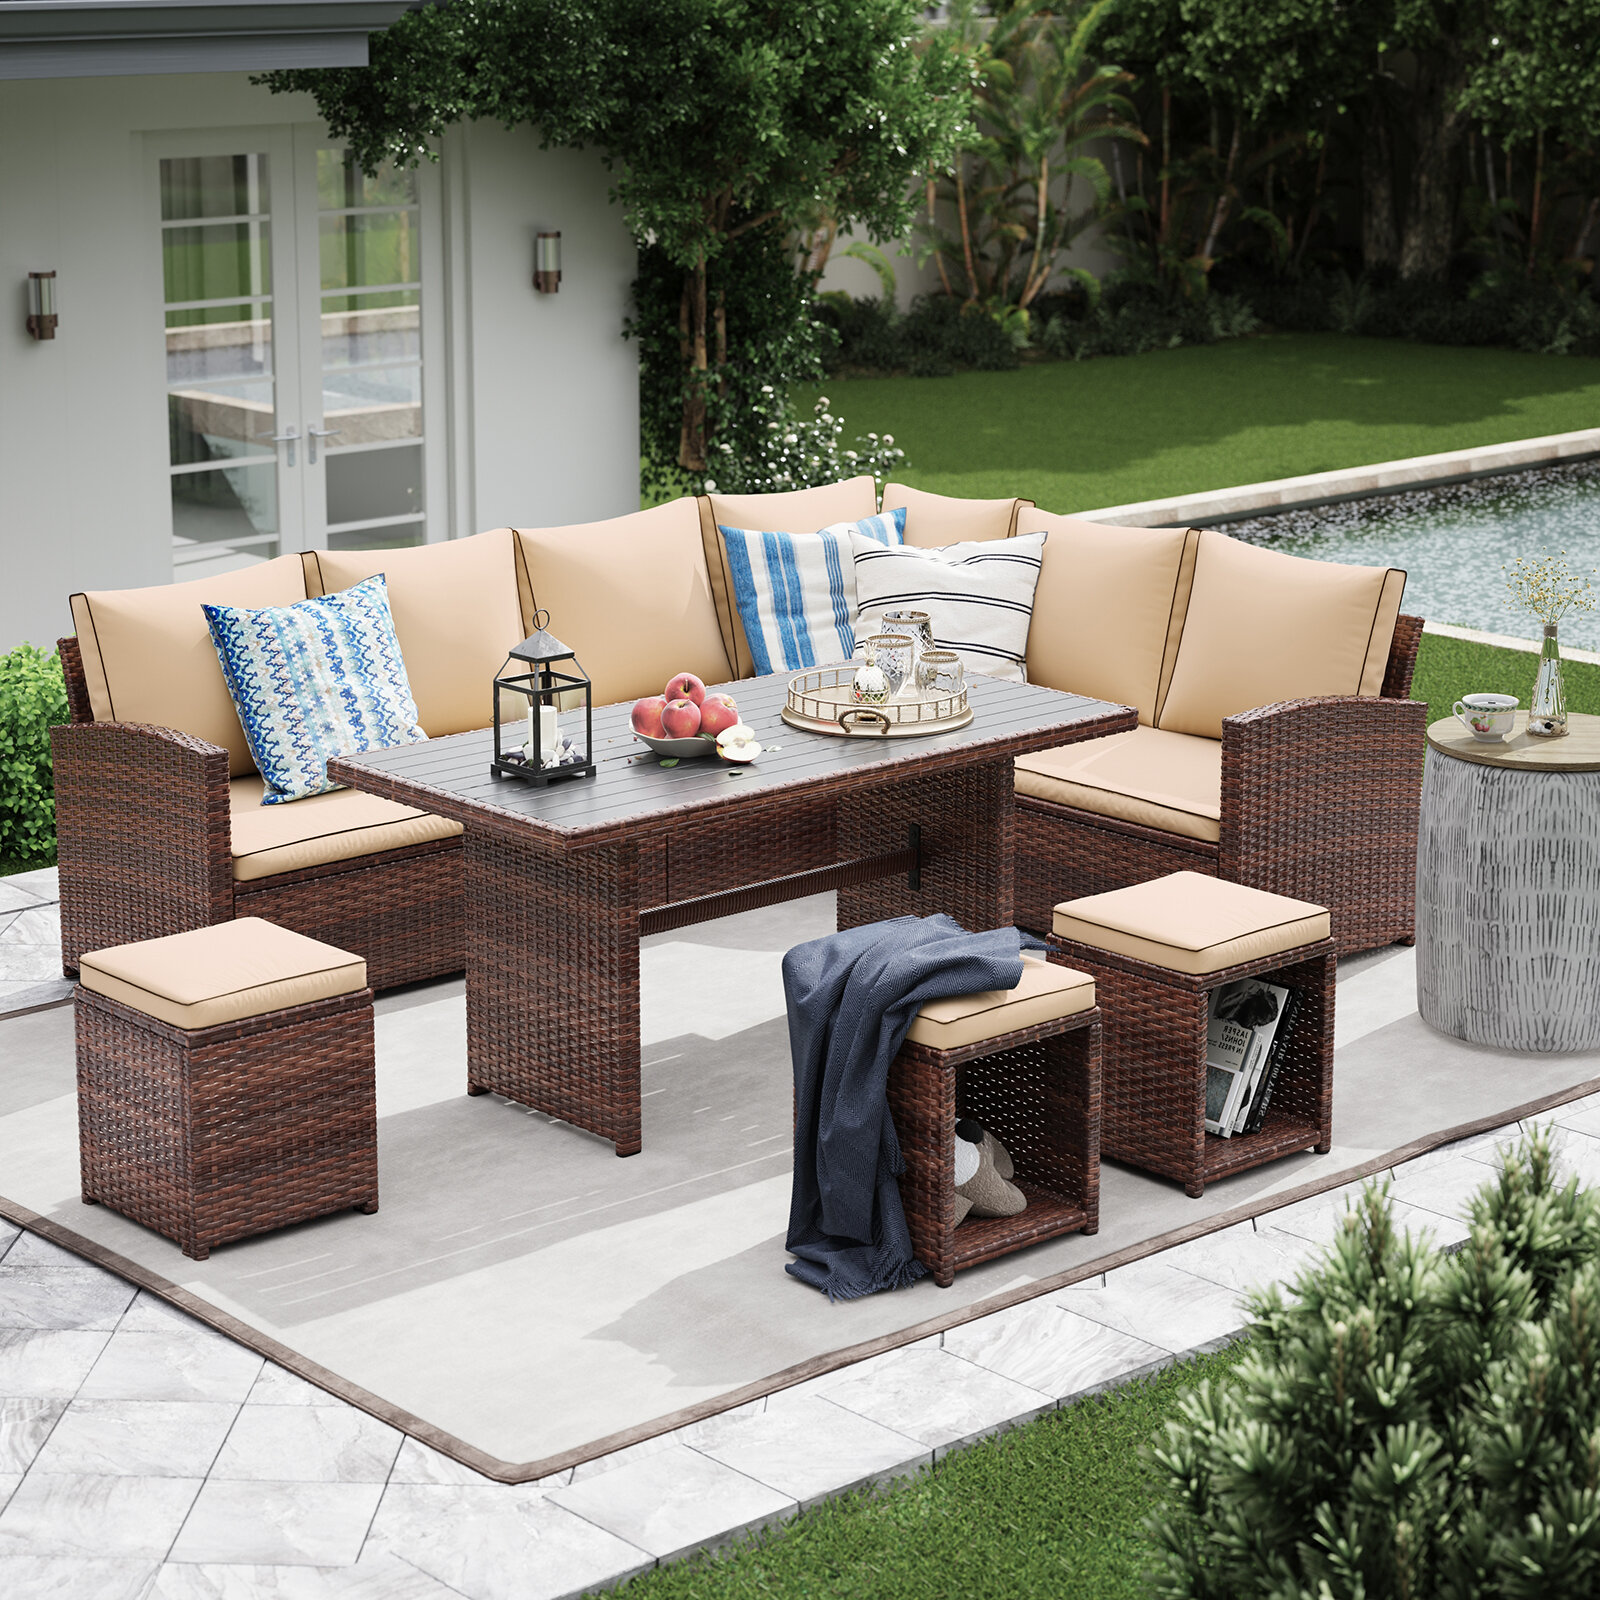 Outdoor Seating For Less 